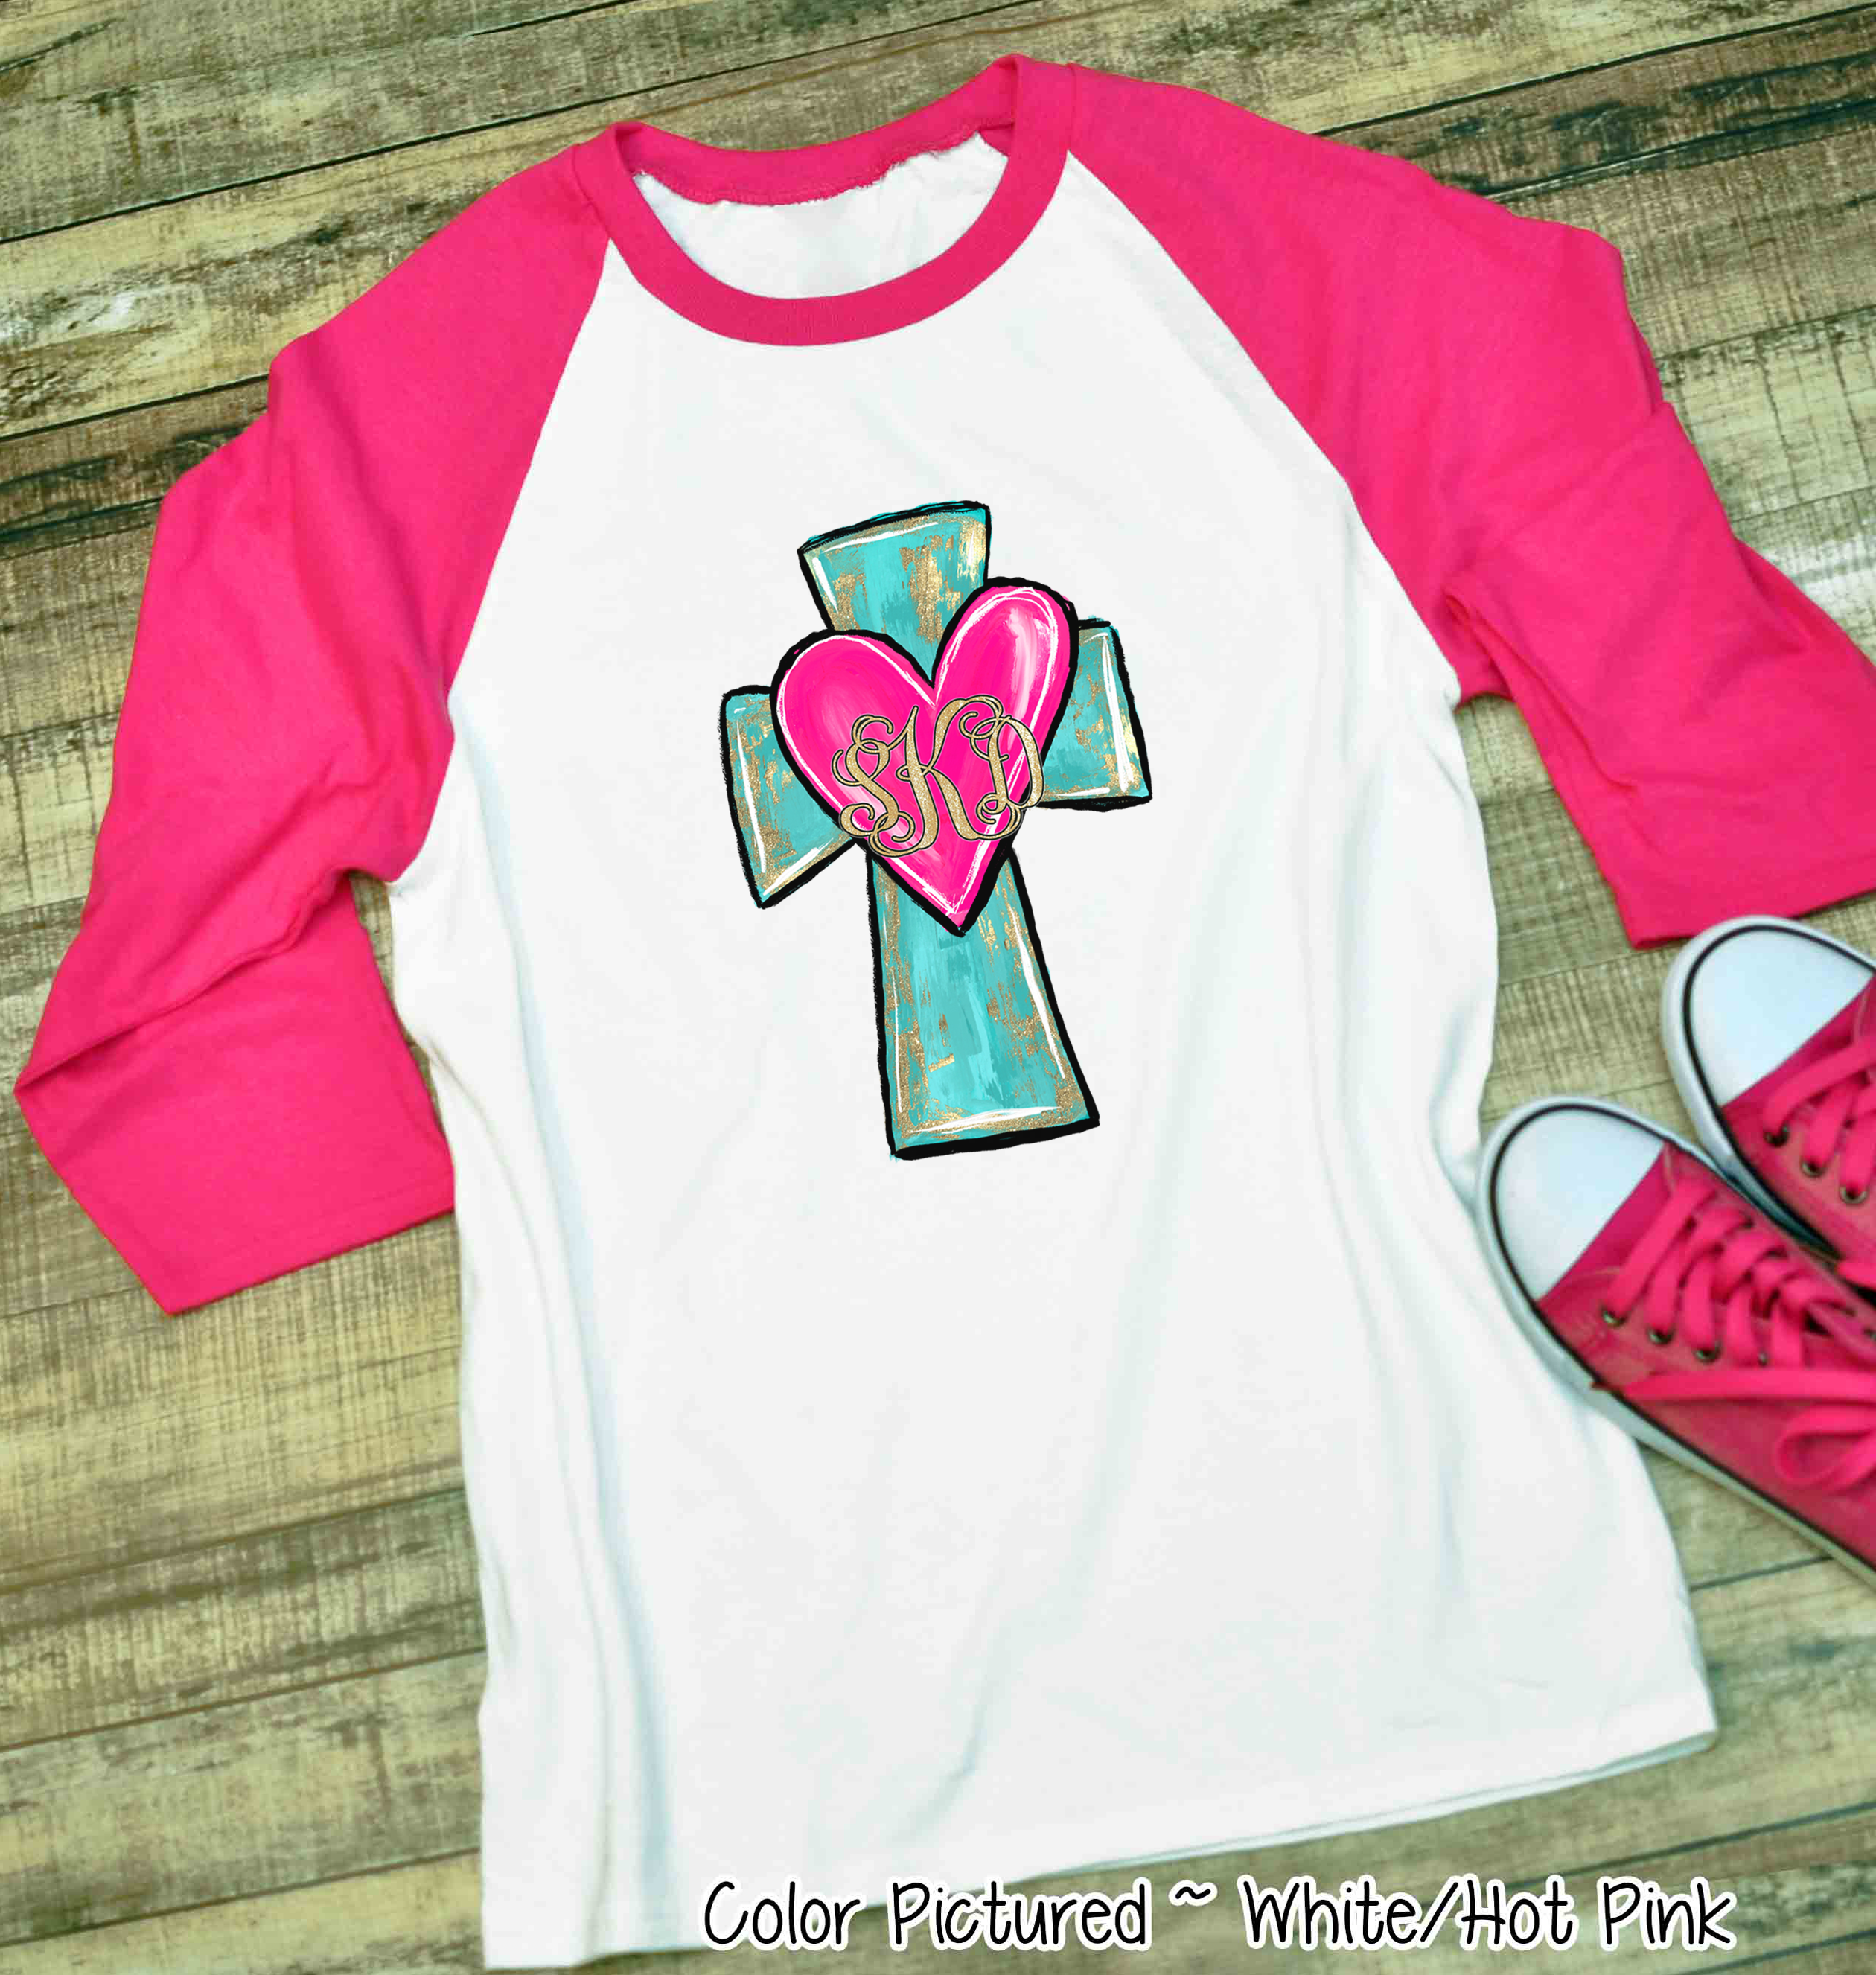 Monogram Cross and Heart with Gold Accents Shirt